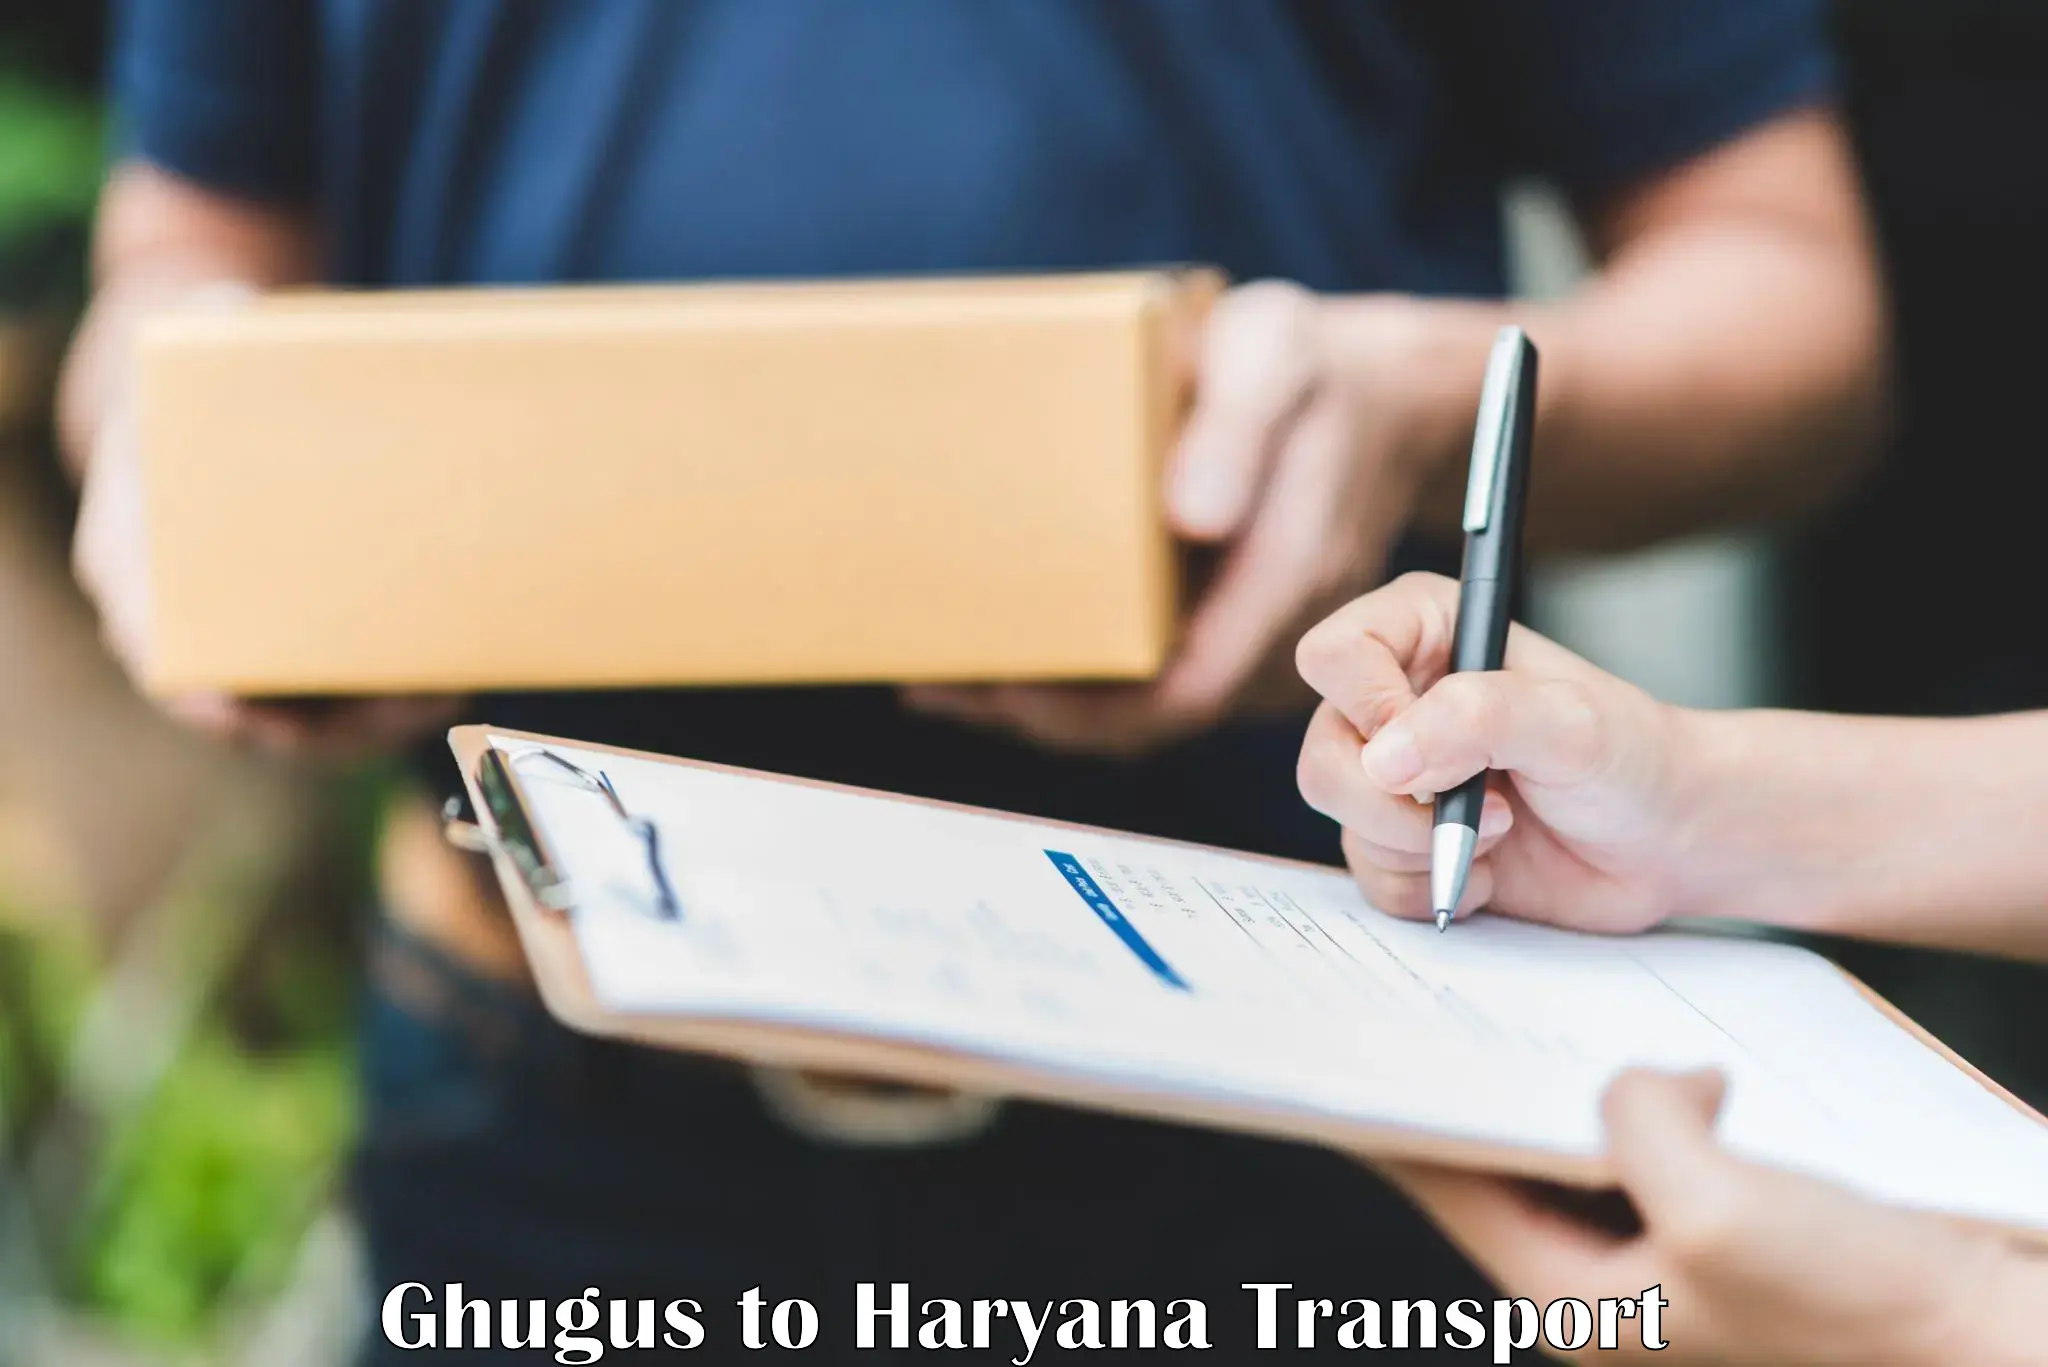 Two wheeler transport services in Ghugus to Haryana